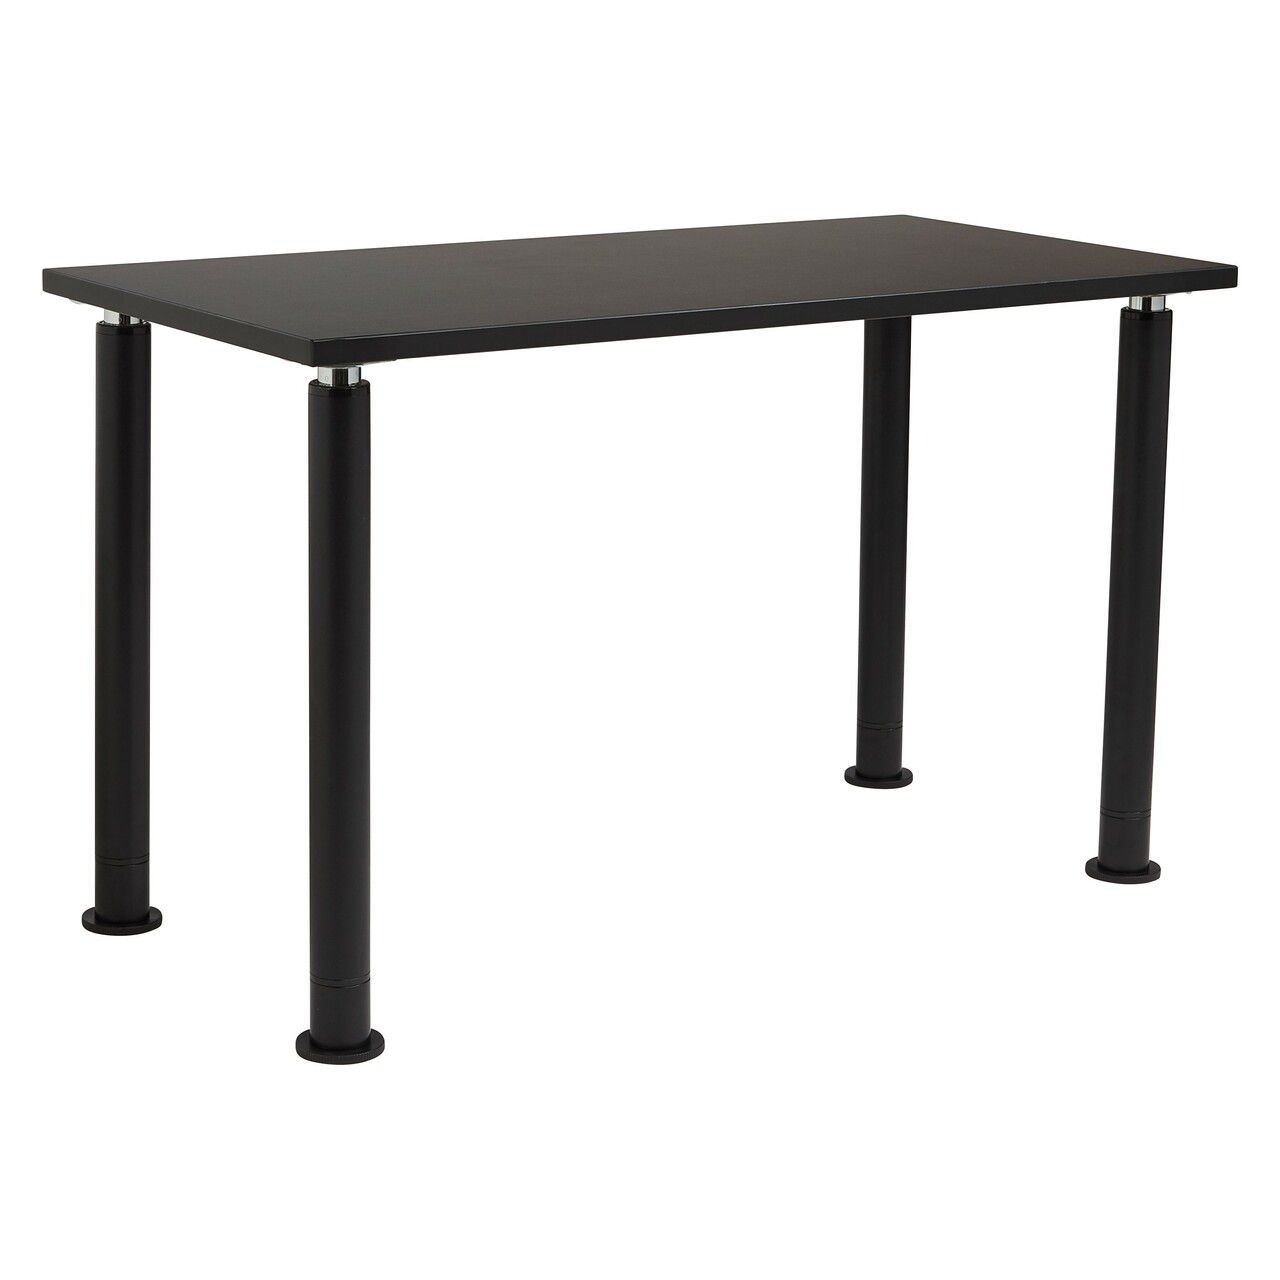 NPS Designer Science Table, 24"x54", Chemical Resistant Top - Black Top and Black Leg